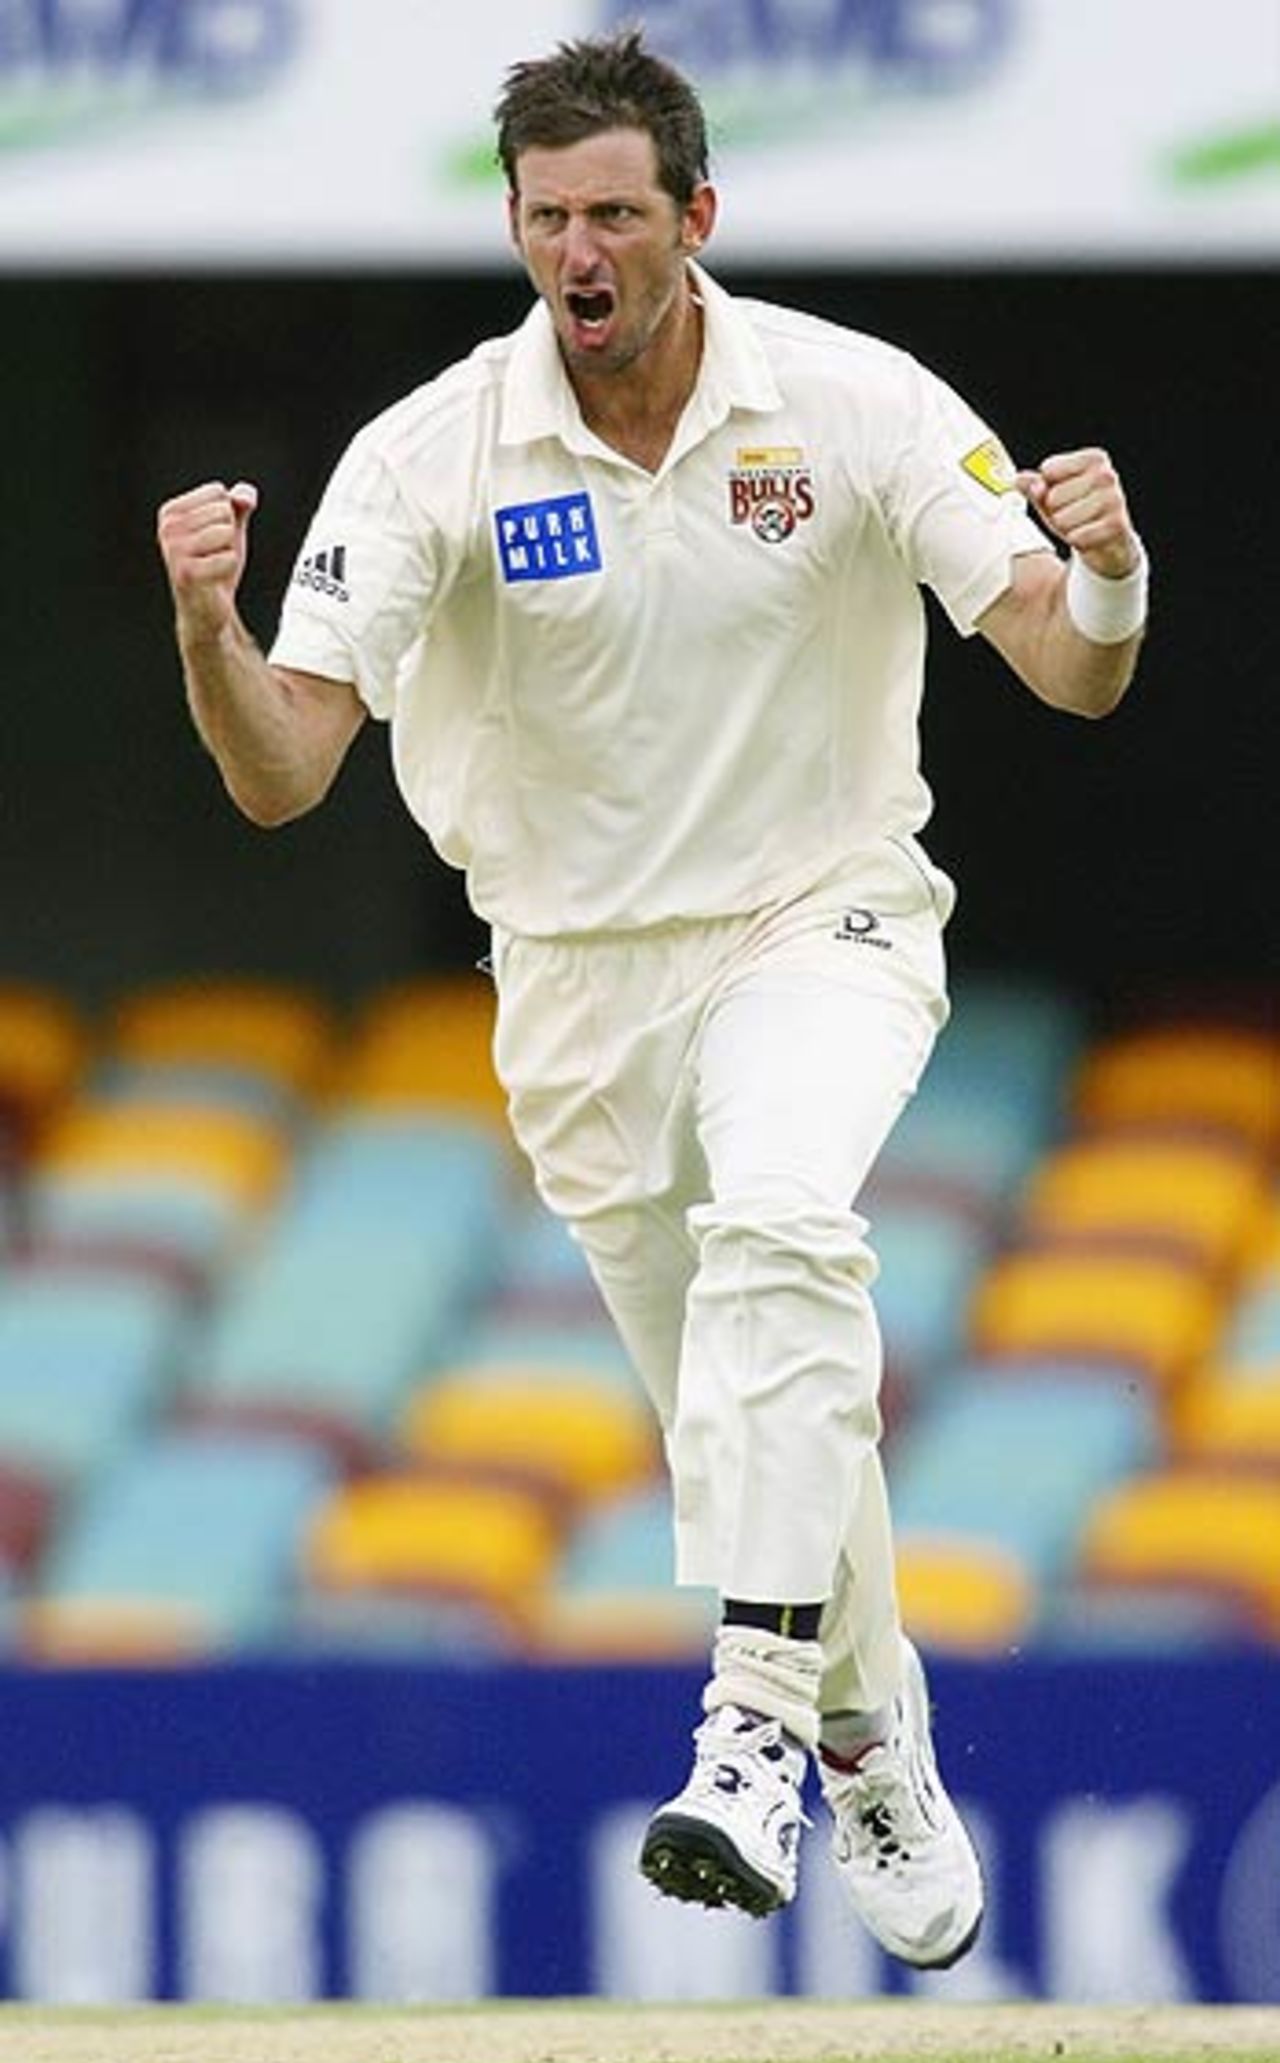 Michael Kasprowicz bagged four wickets to guide the Bulls to victory, Queensland v South Australia, Pura Cup, Woolloongabba, Brisbane, February 21 2006          